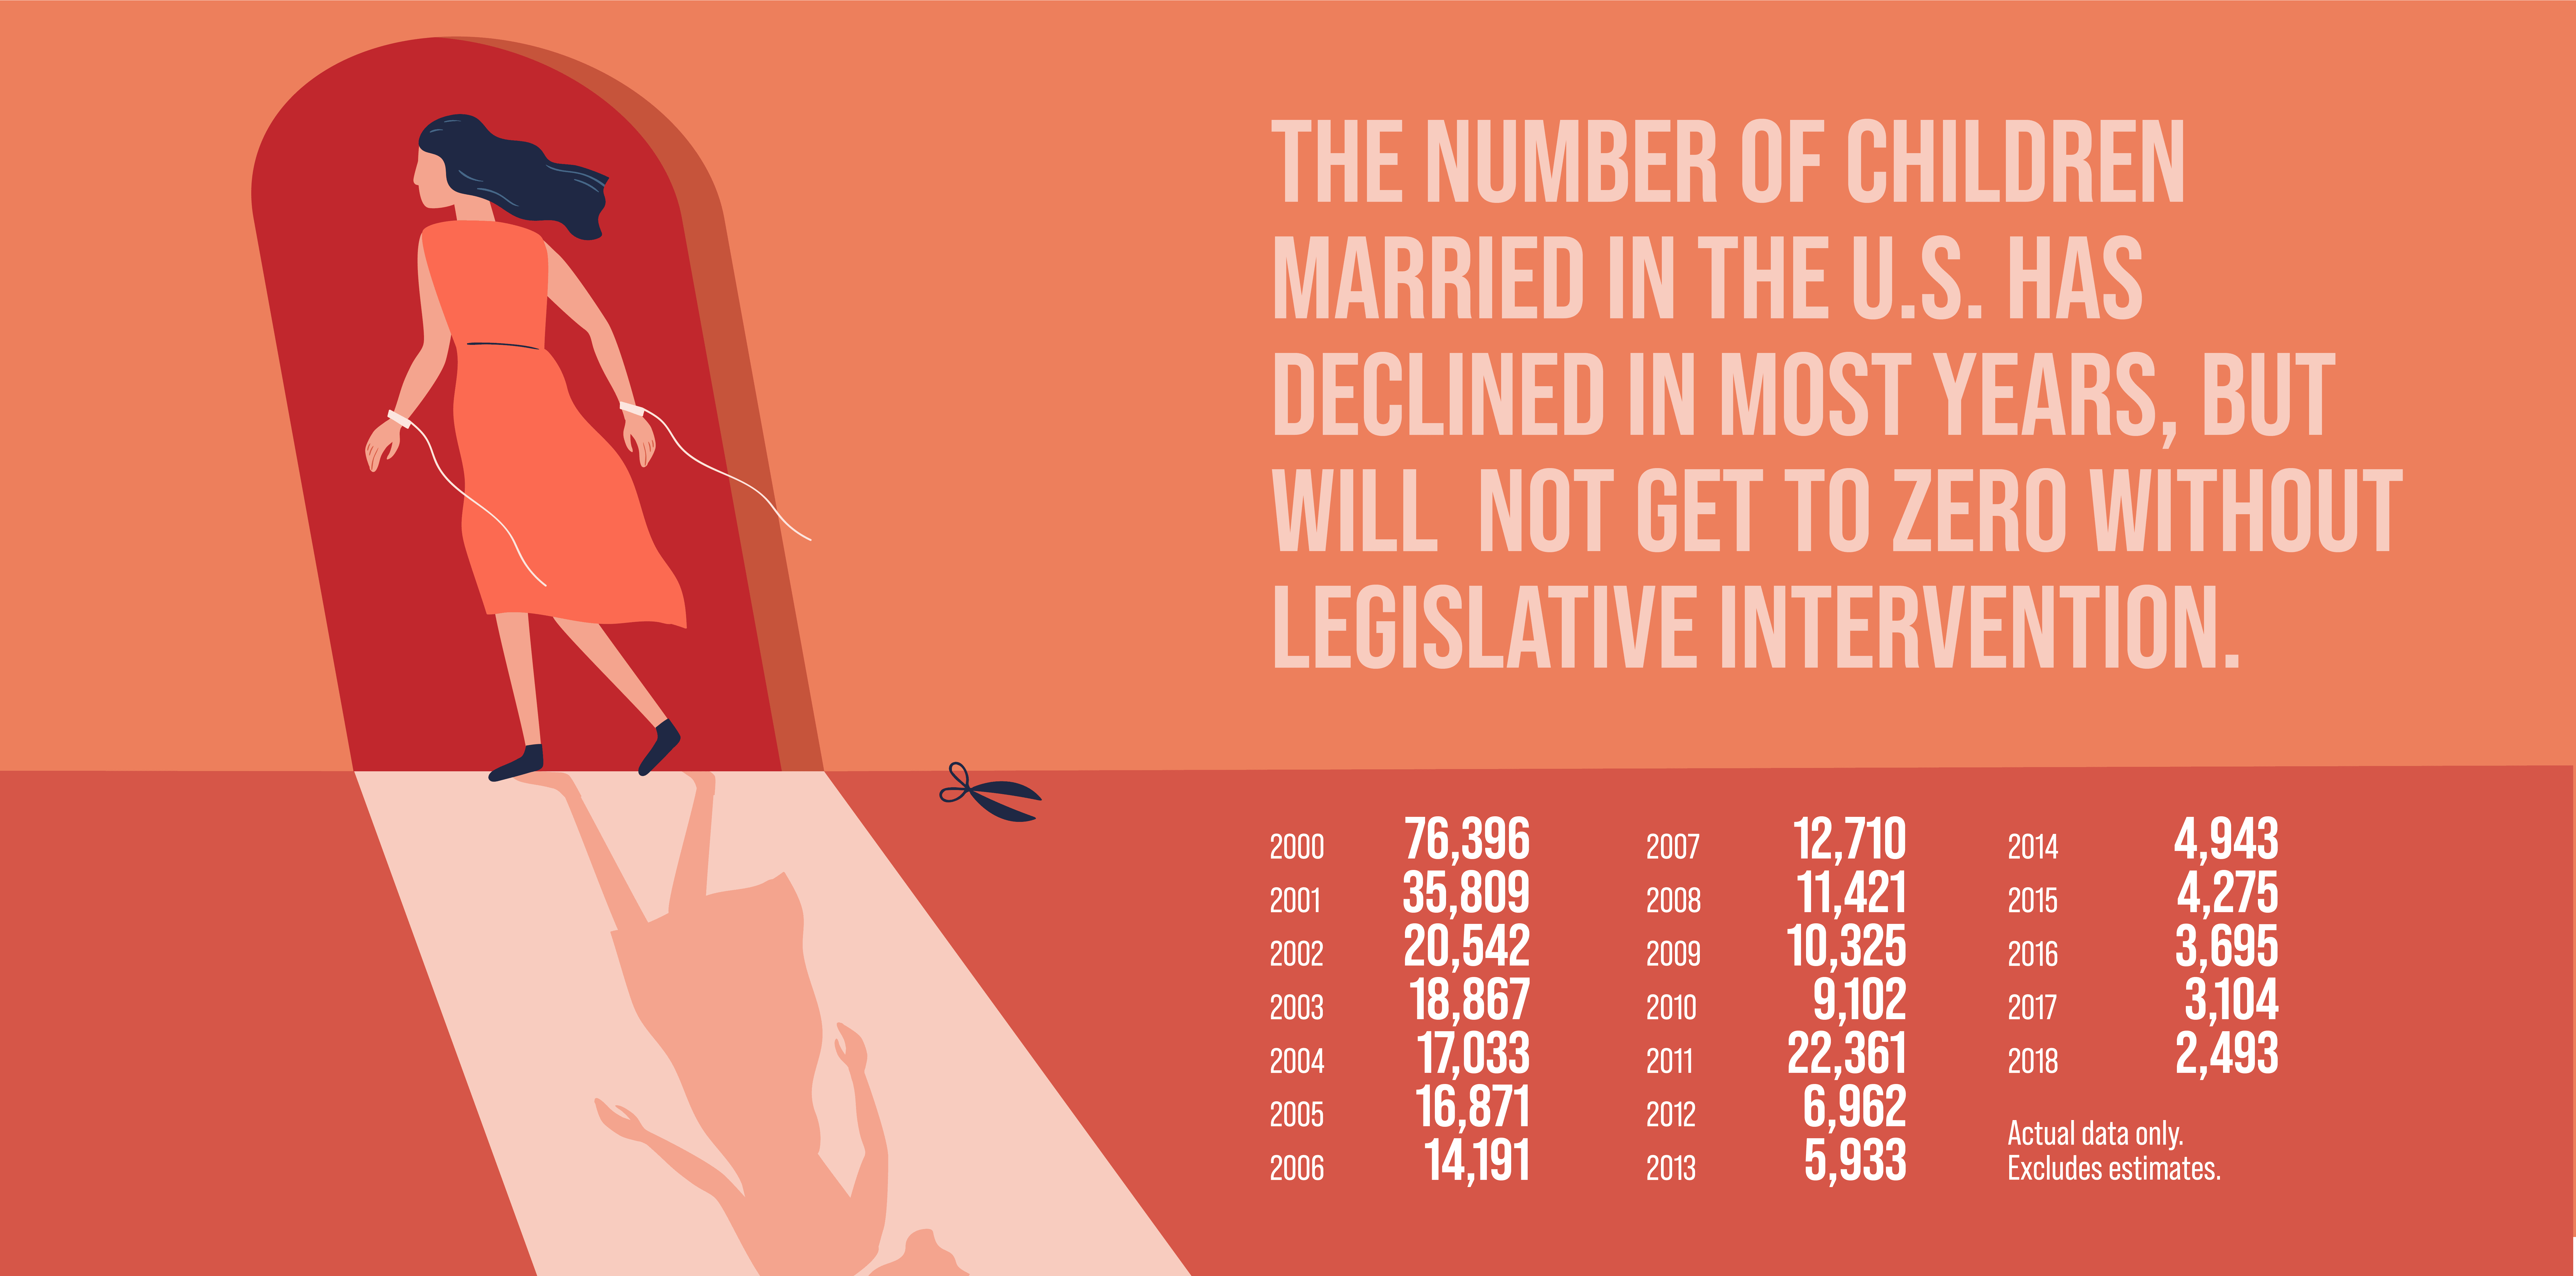 Graphic: The number of children married in the U.S. has declined in most years, but will not get to zero without legislative intervention. 2000: 76,396; 2001: 35,809; 2002: 20,542; 2003: 18,867; 2004: 17,033; 2005: 16,871; 2006: 14,191; 2007: 12,710; 2008: 11,421; 2009: 10,325; 2010: 9,102; 2011: 22,361; 2012: 6,962; 2013: 5,933; 2014: 4,943; 2015: 4,275; 2016: 3,695; 2017: 3,104; 2018: 2,493. Actual data only. Excludes estimates.